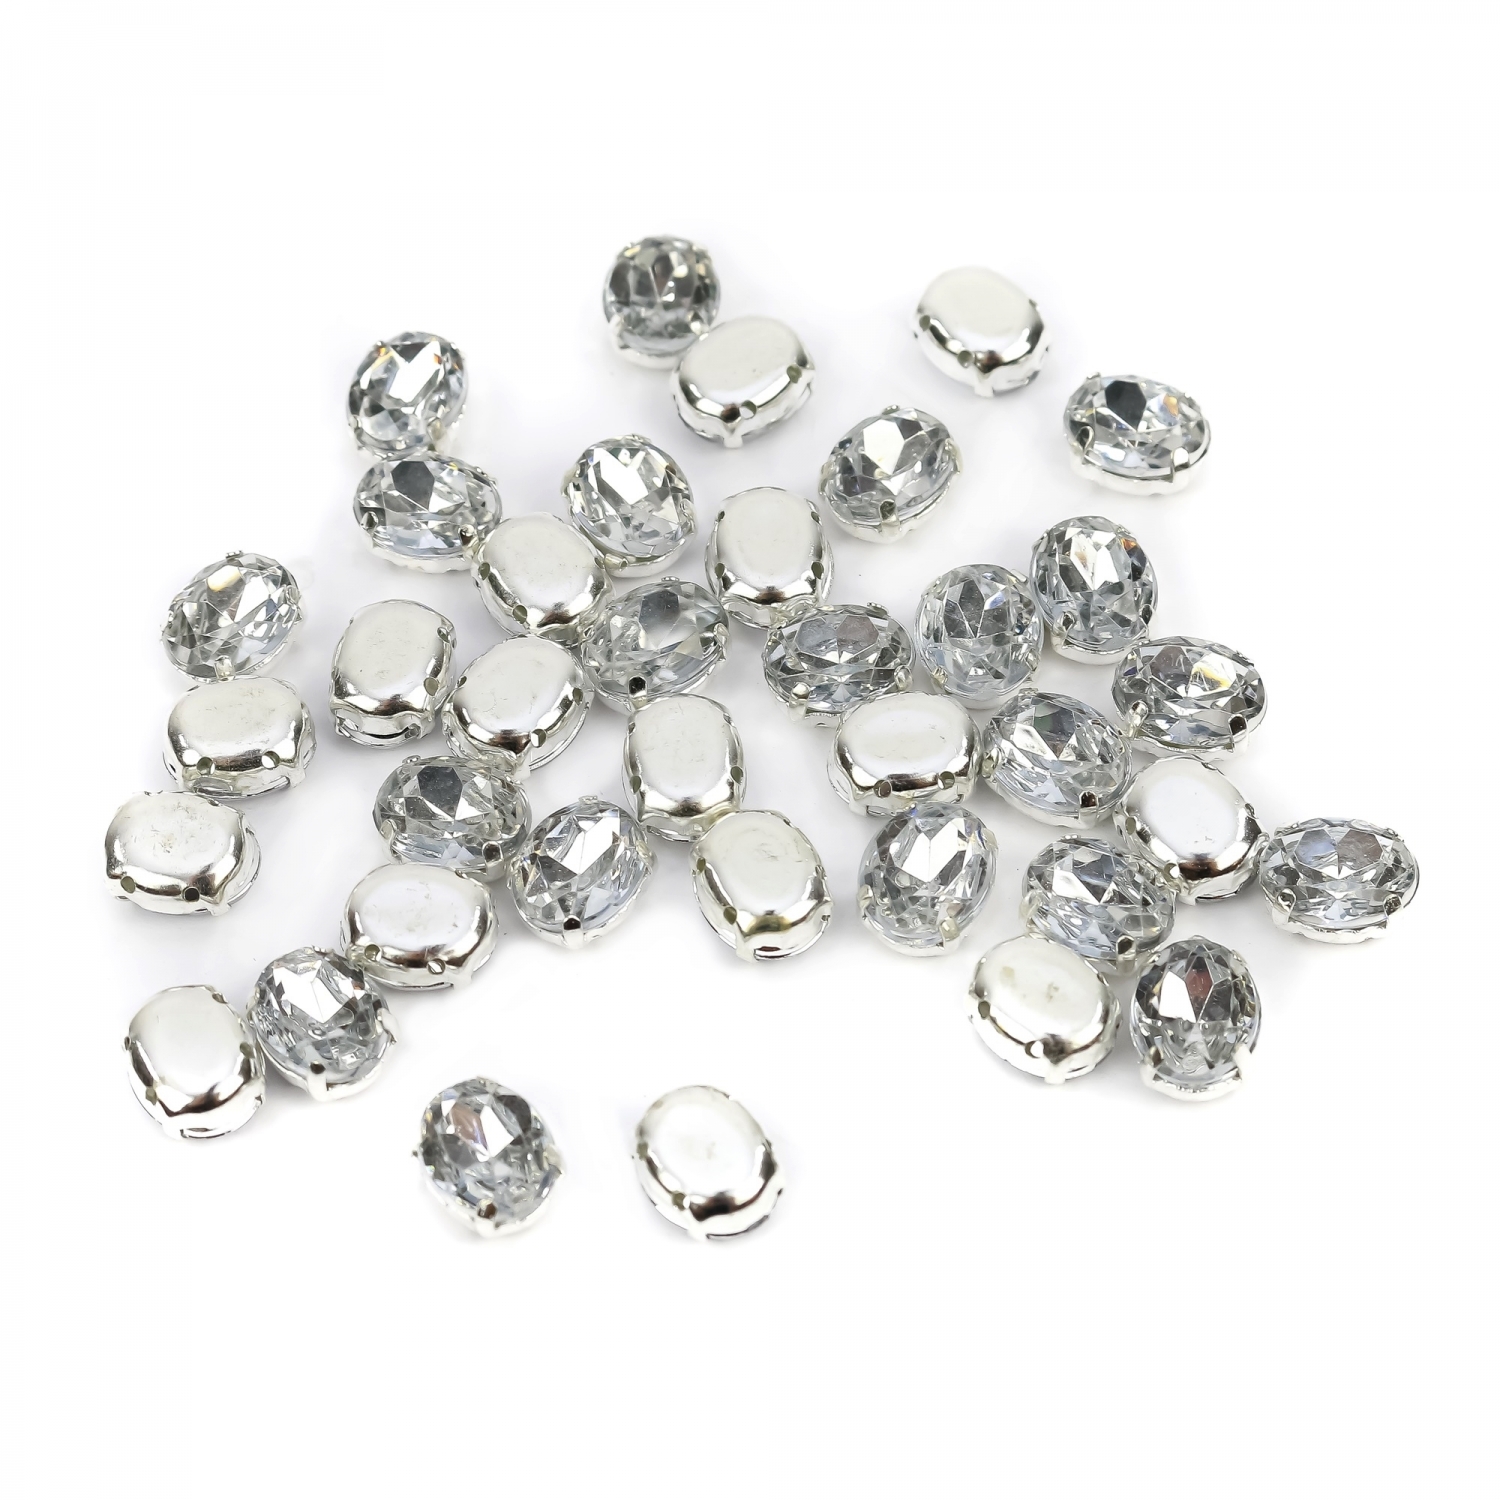 Sew-on Crystals, Size 8x10 mm (100 pcs/pack)Code: R11784